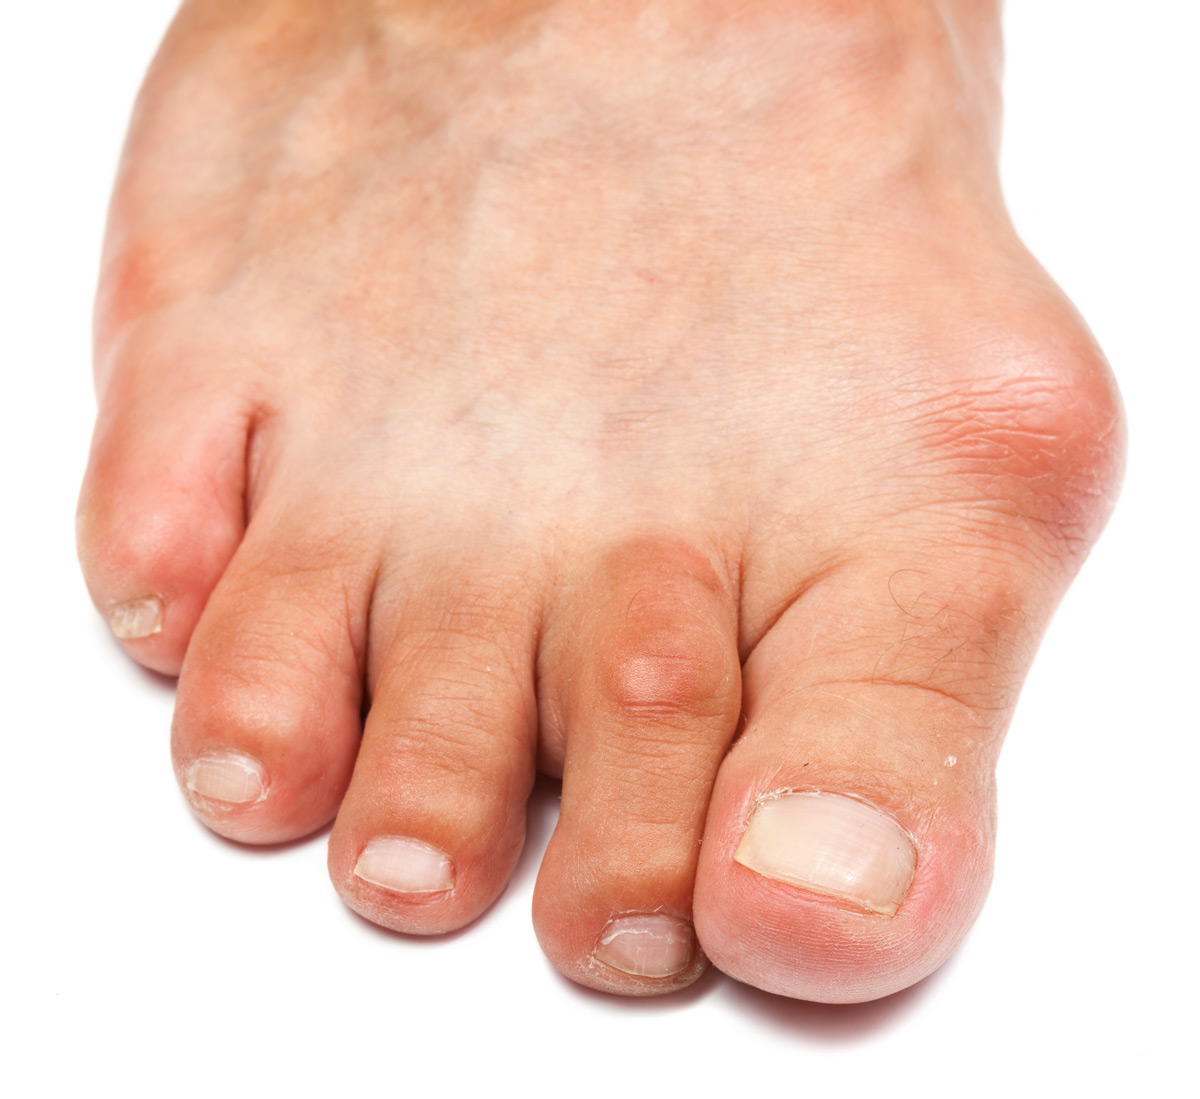 Foot Health: Common Issues and How to Manage Them